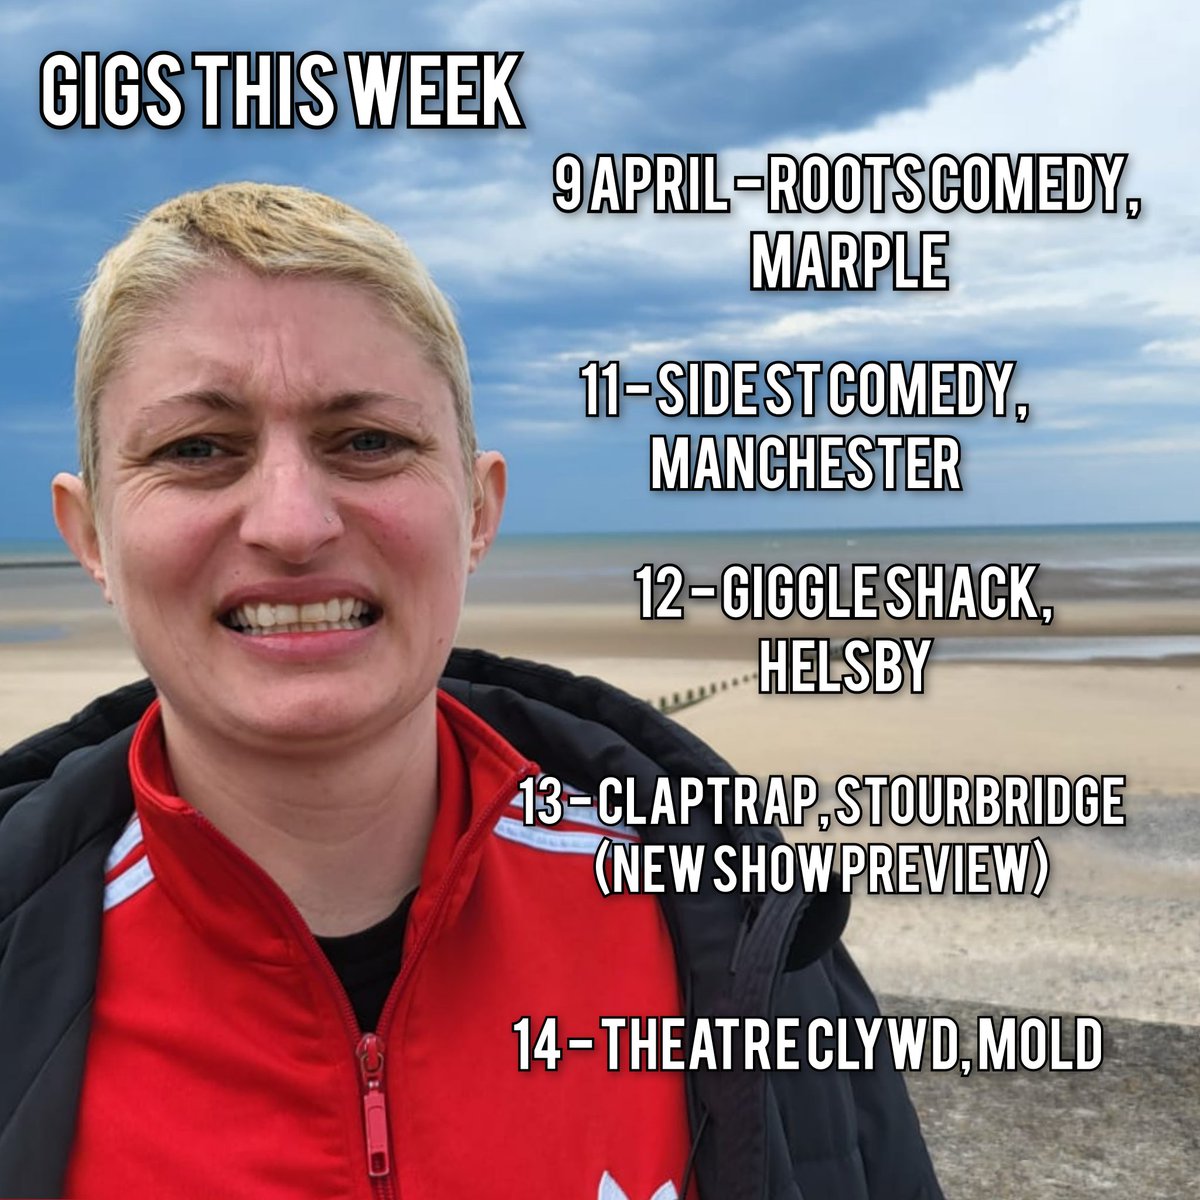 This week #marple #manchester #helsby #mold #stourbridge #comedy